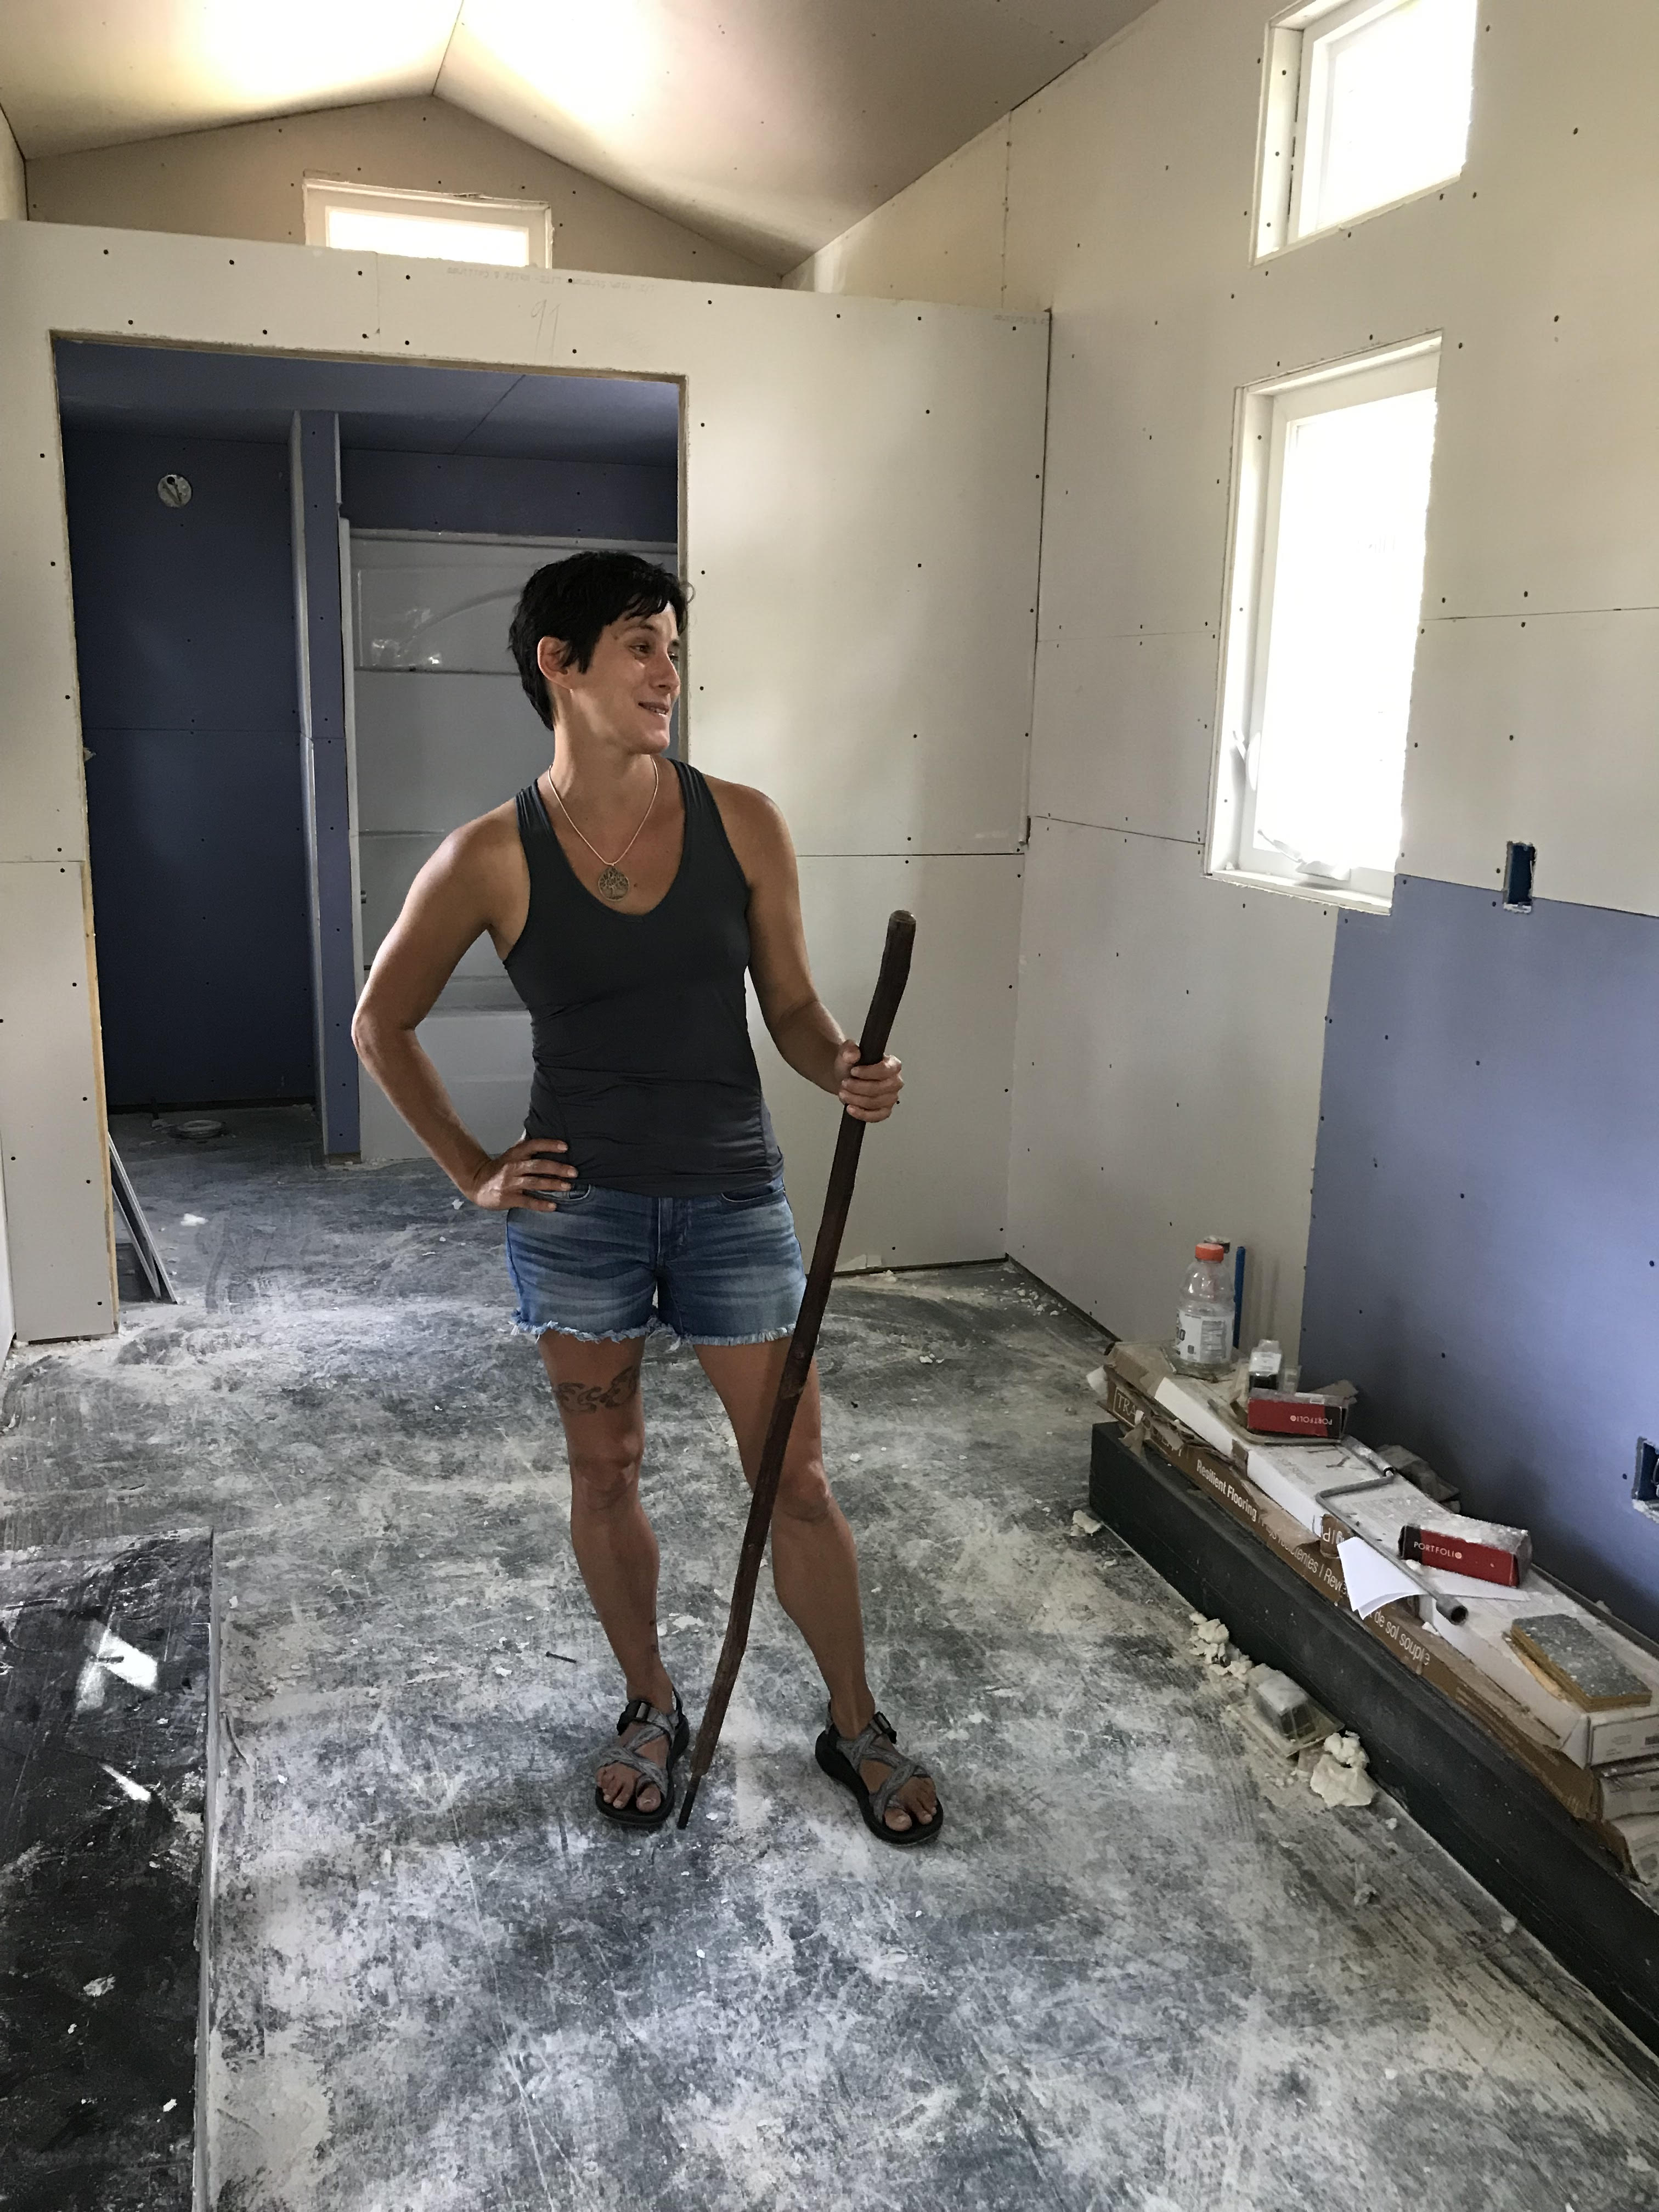 Gina Marie, holding a wooden walking stick, stands amid construction inside her tiny house.